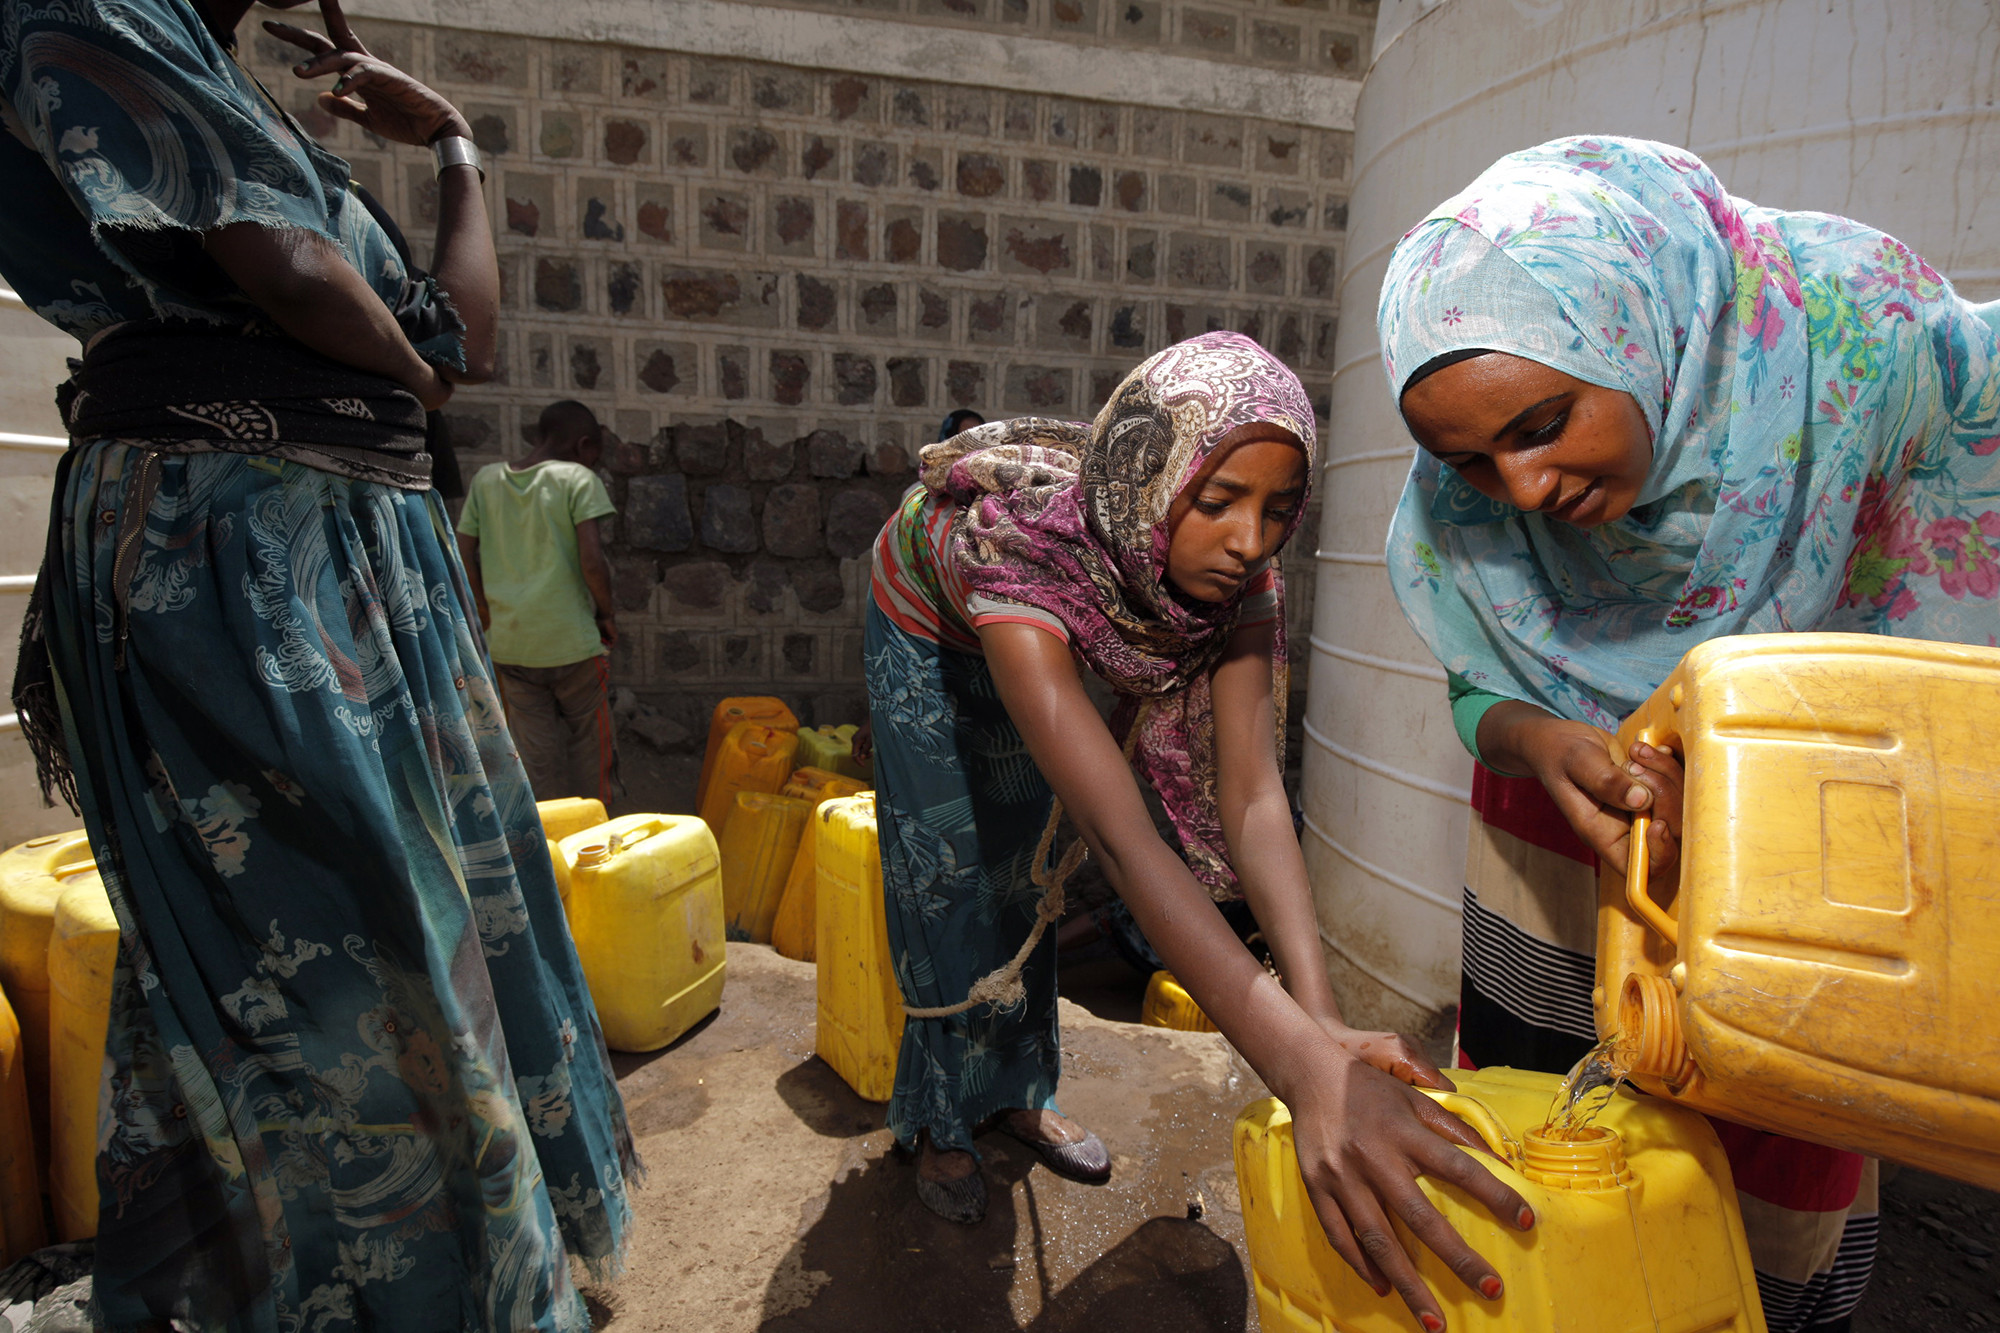 By building a water trucking facility just five minutes from her home, Plan International Ethiopia has transformed Kadija’s business, giving her more independence and autonomy